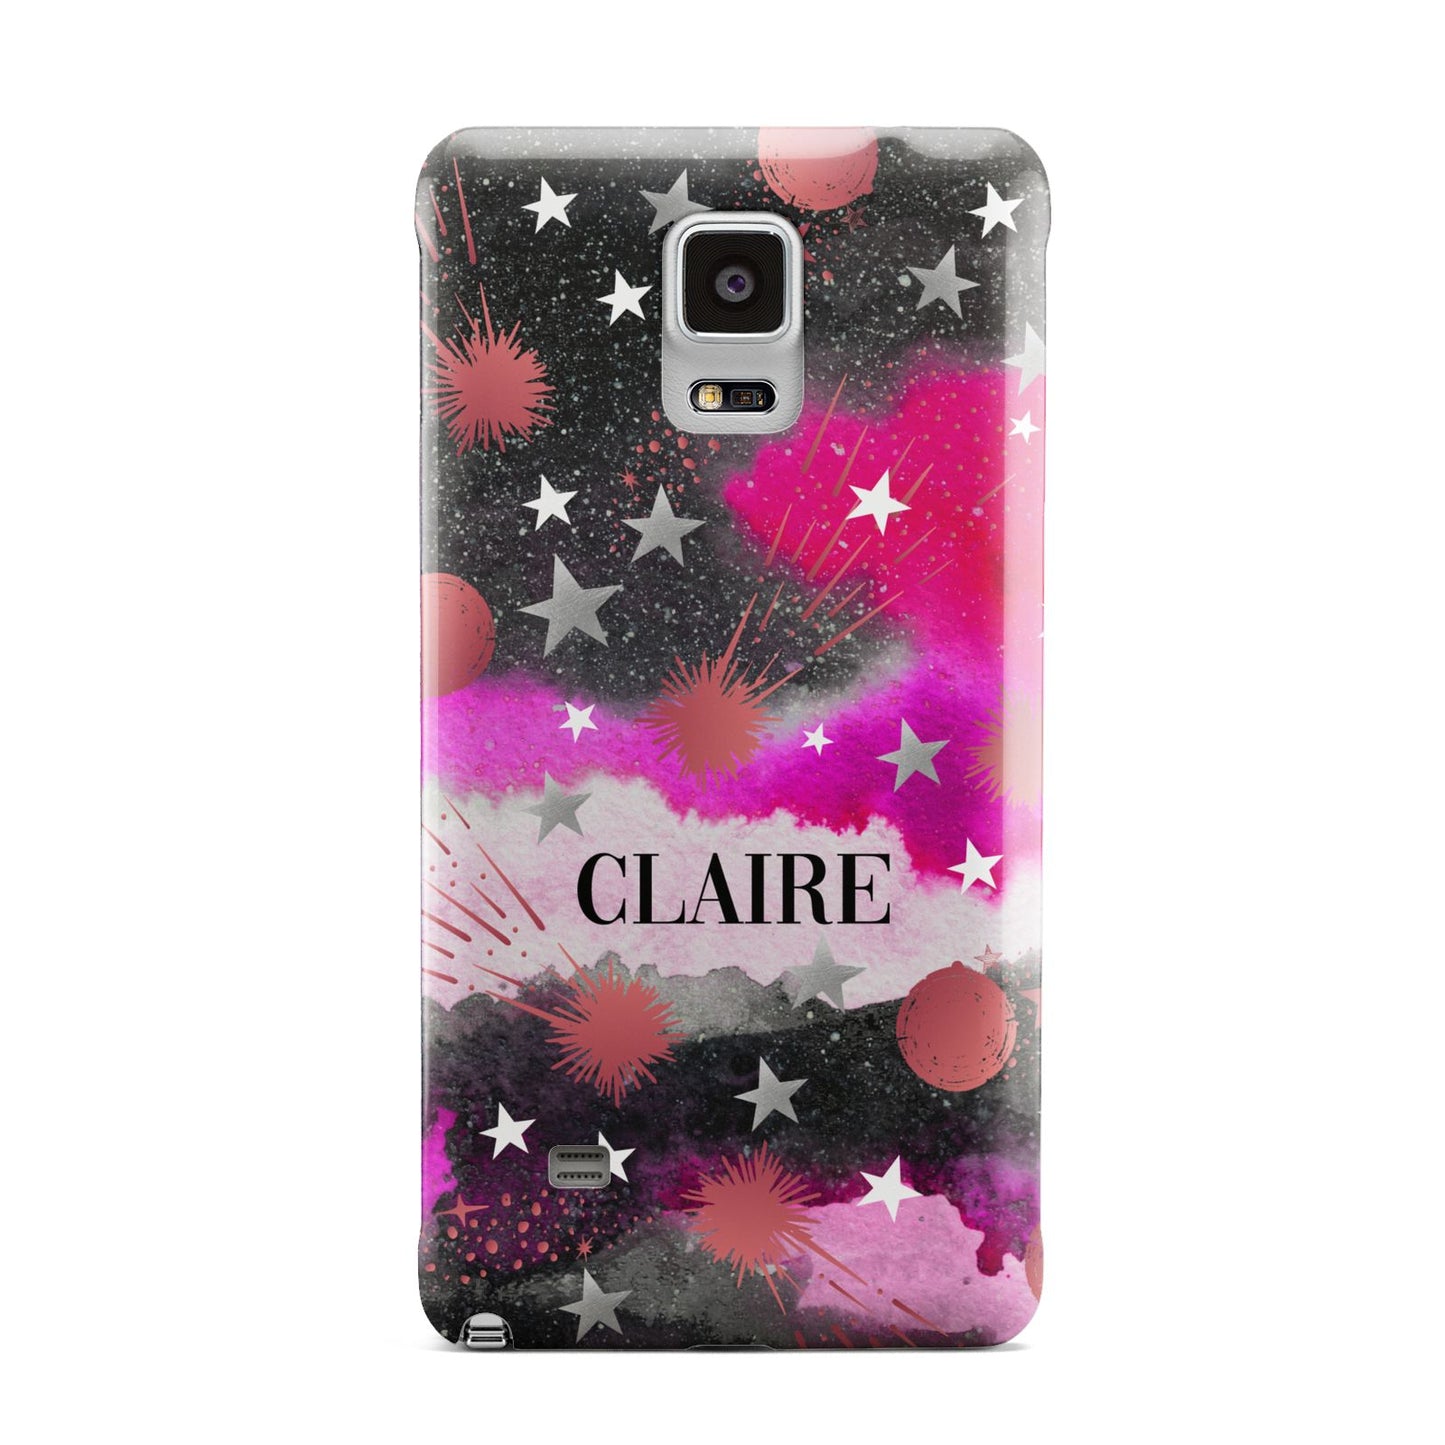 Personalised Pink Celestial Samsung Galaxy Note 4 Case